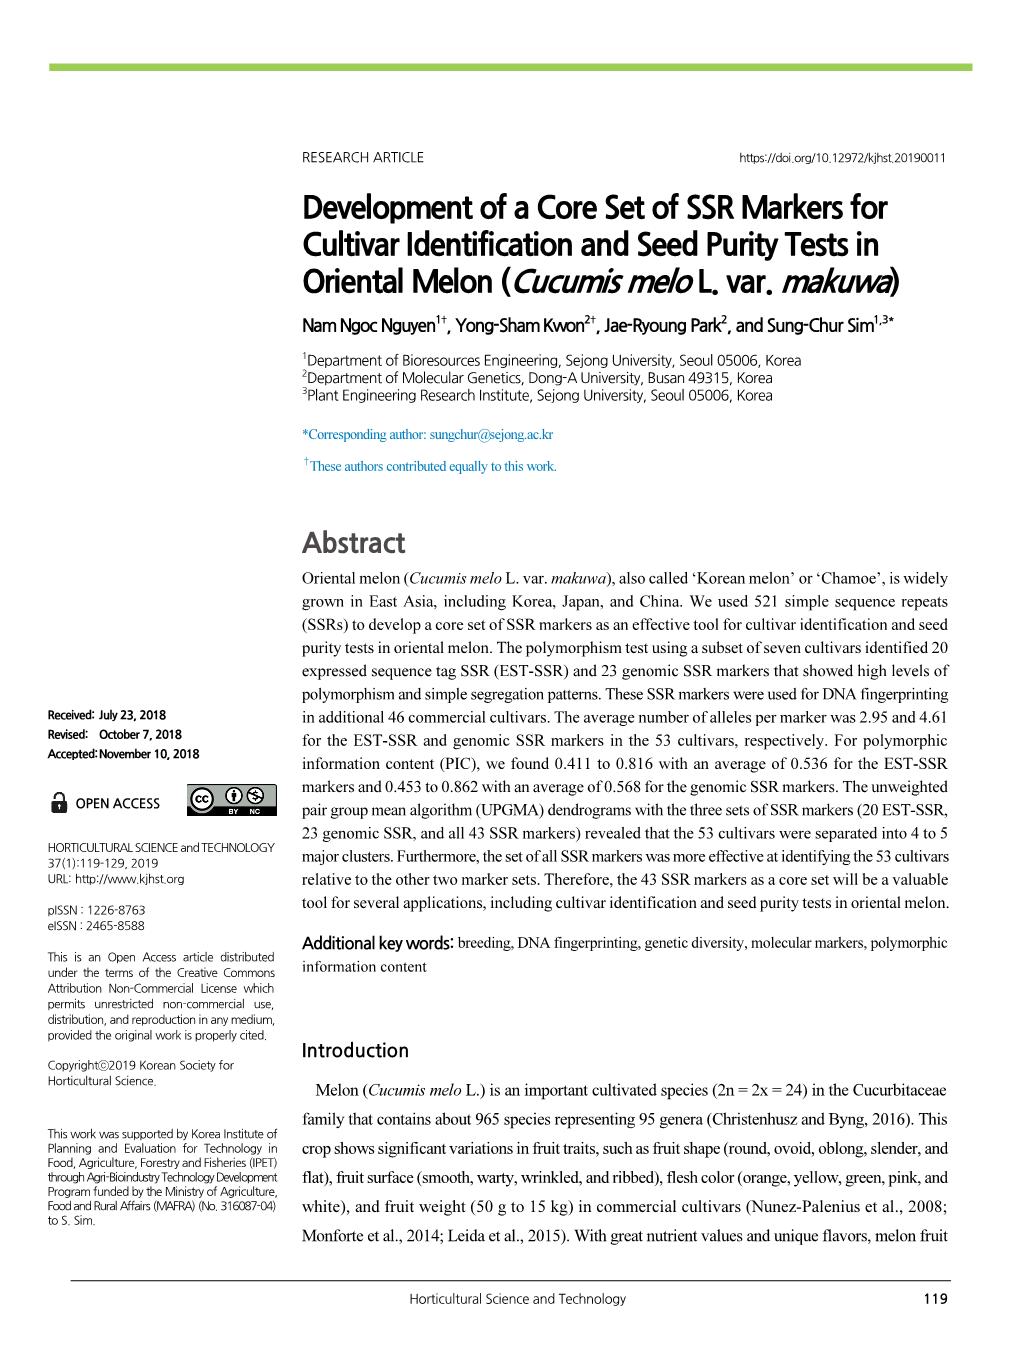 Development of a Core Set of SSR Markers for Cultivar Identification and Seed Purity Tests in Oriental Melon (Cucumis Melo L